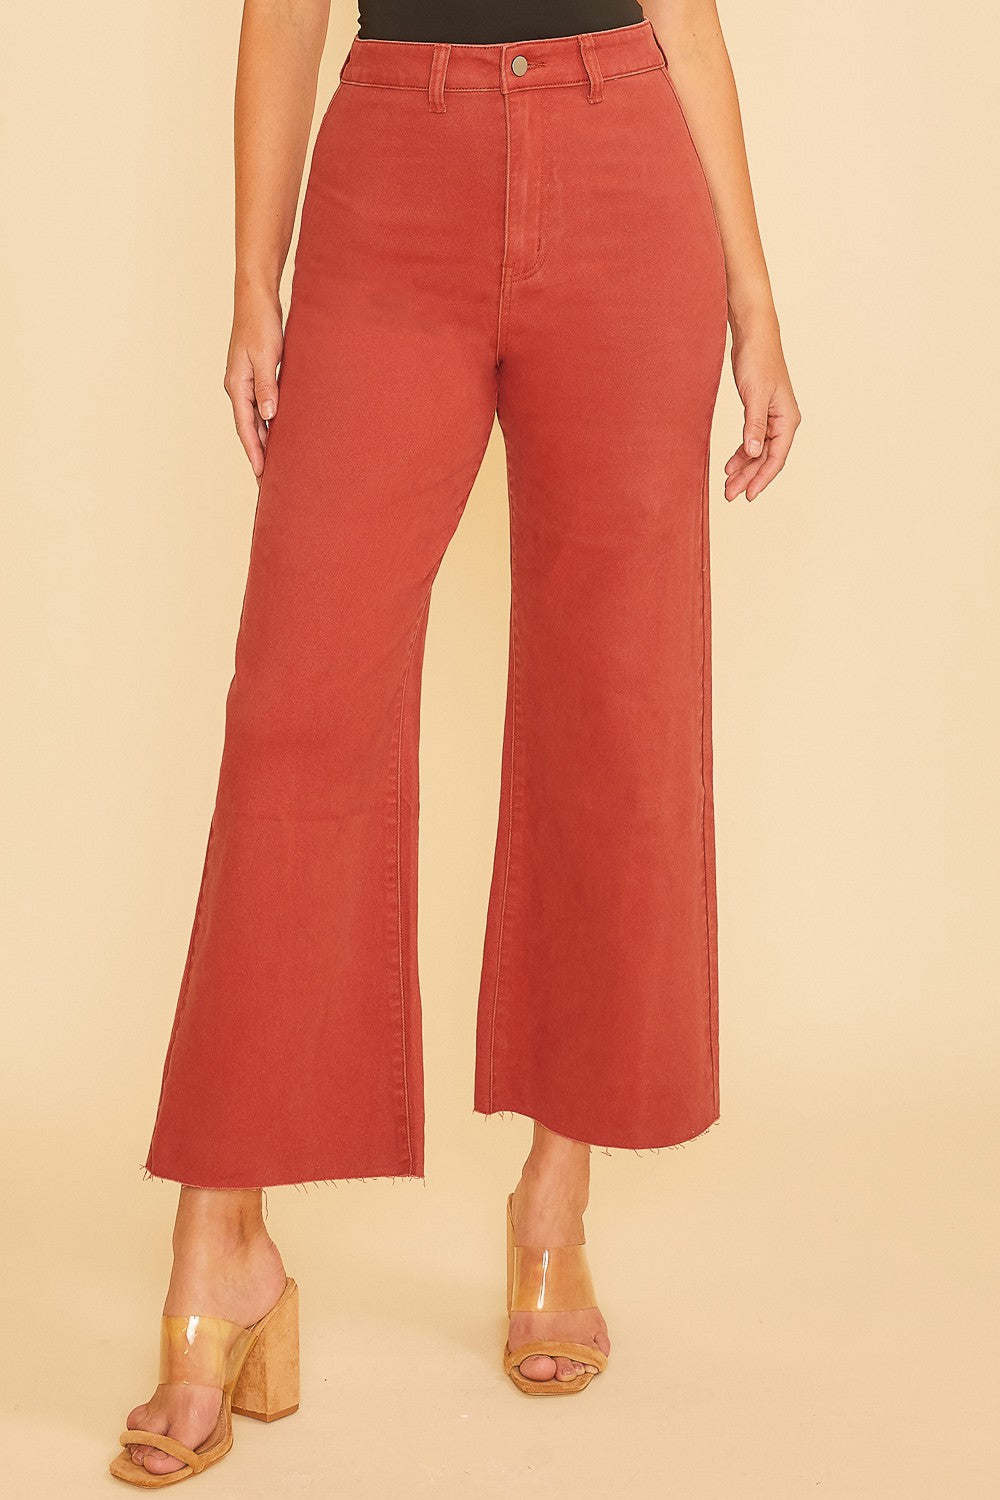 Red Mineral Washed Denim Jeans